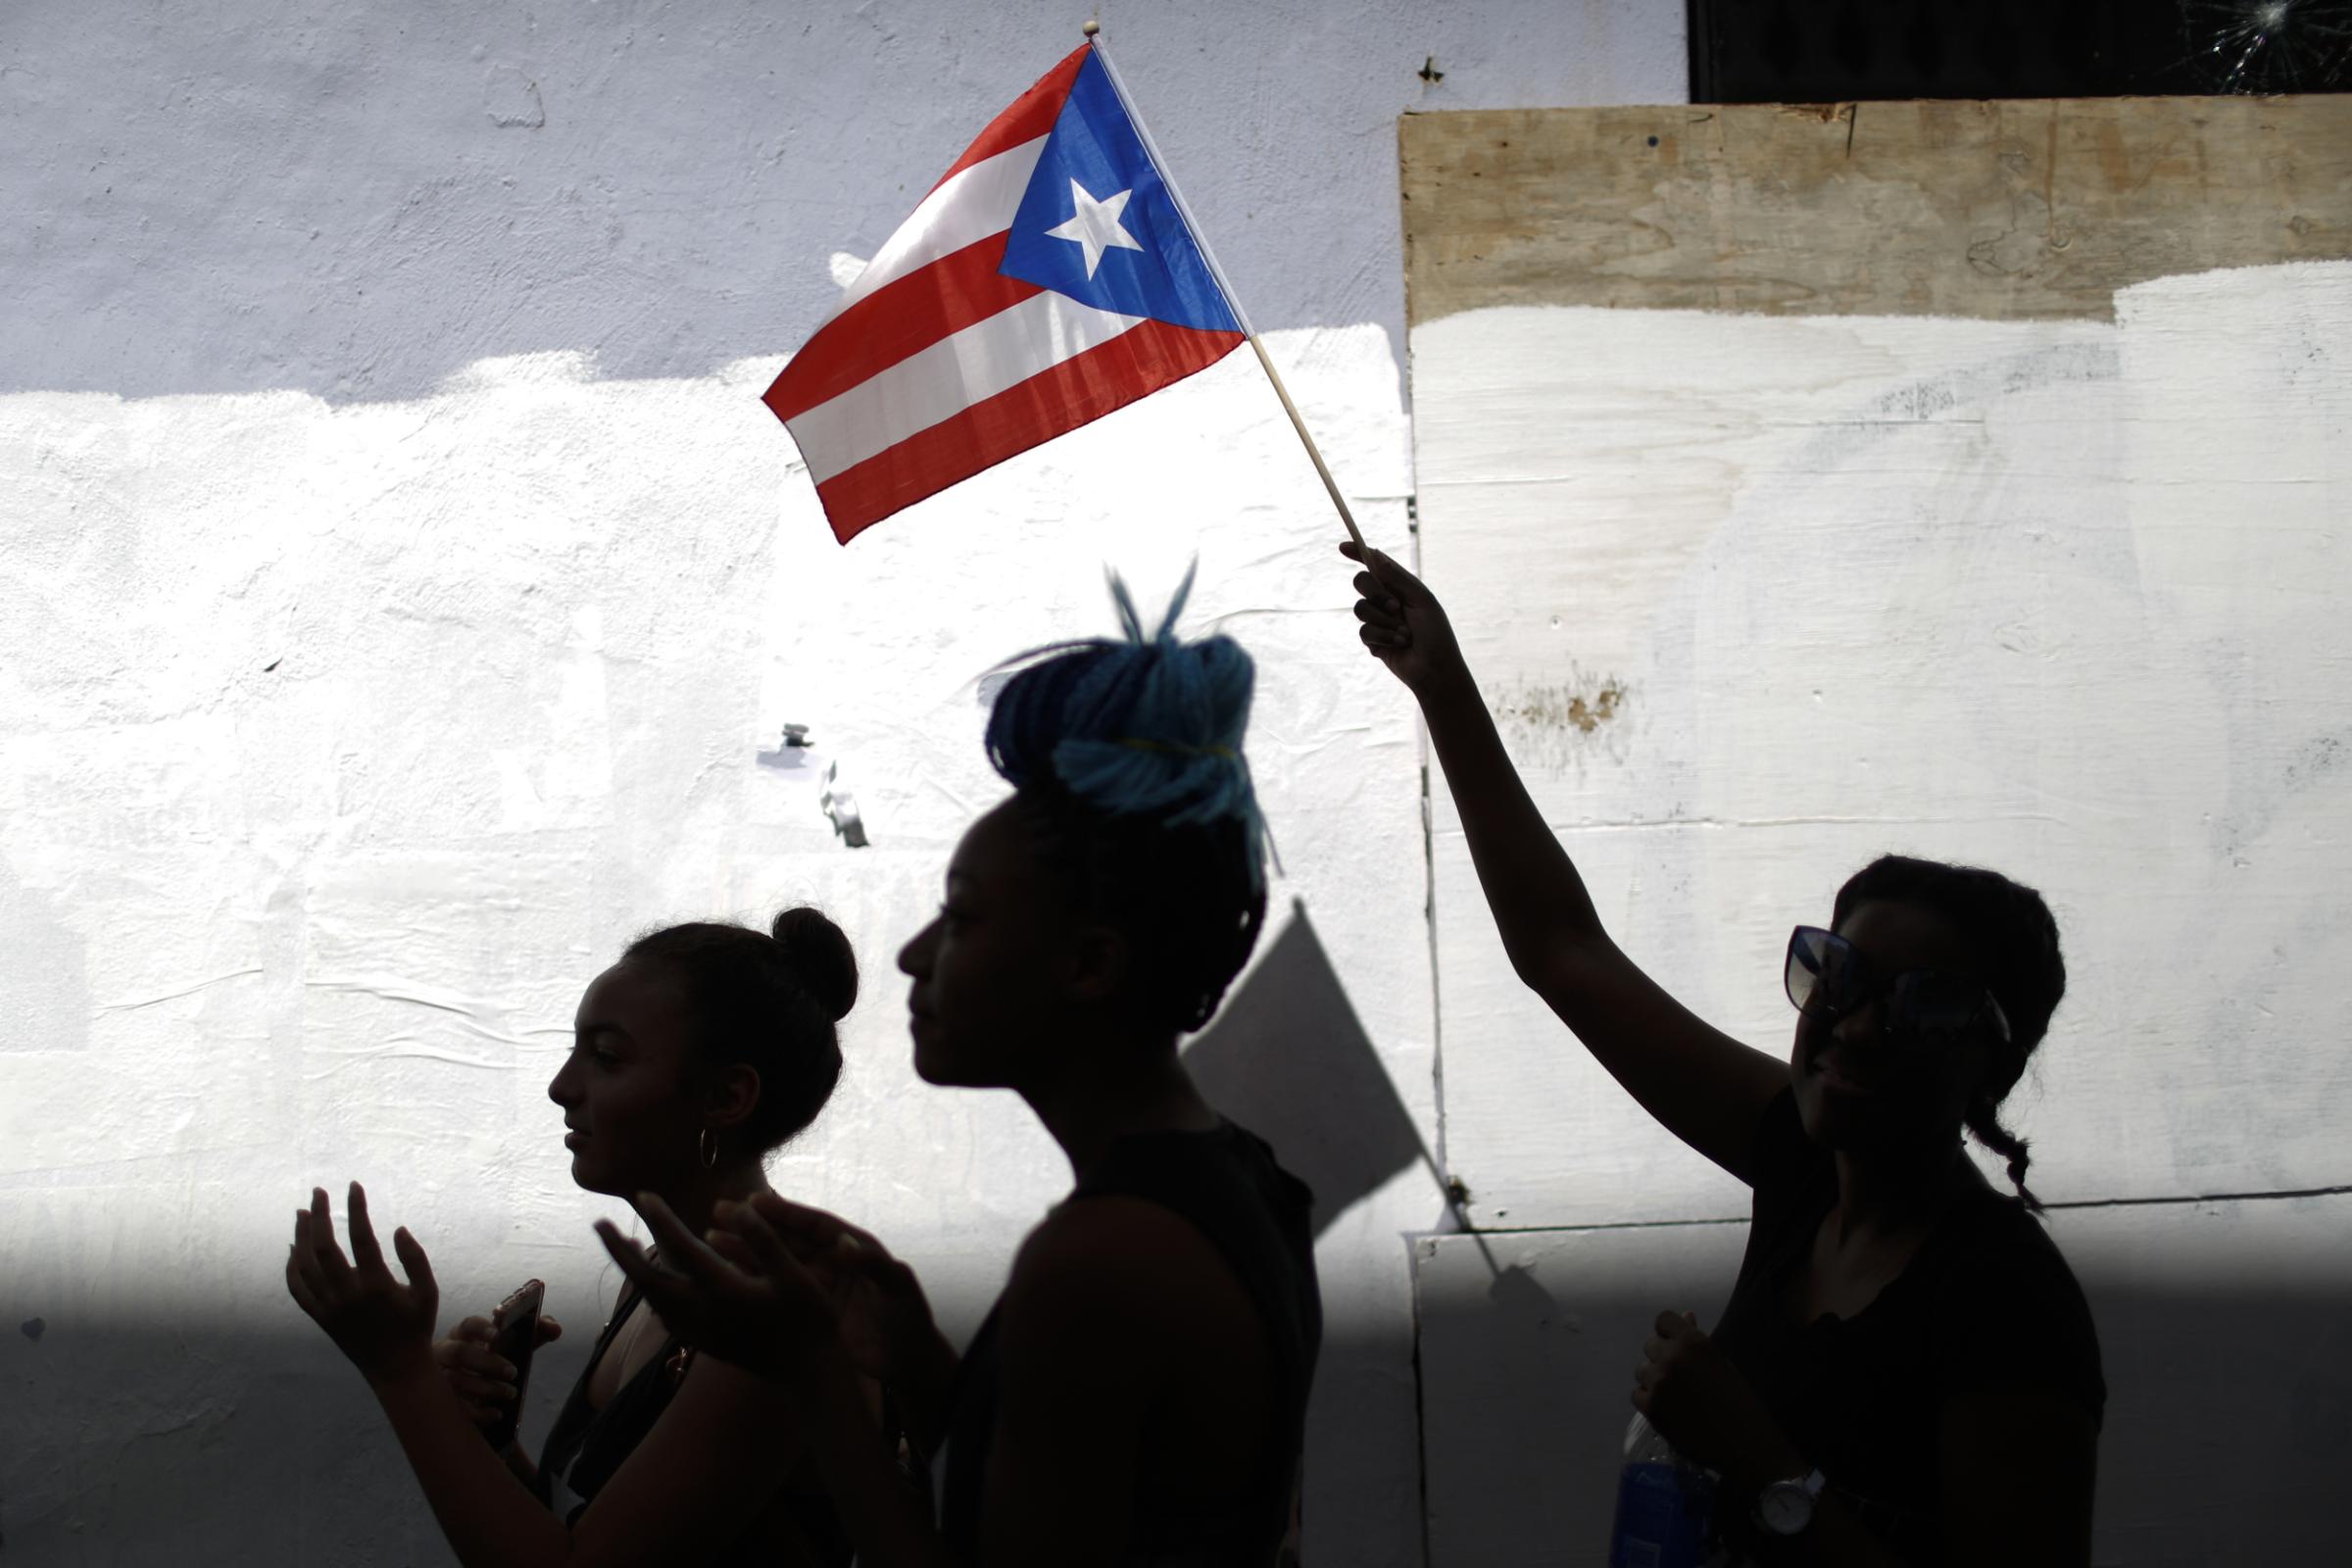 slideshow - A woman waves a Puerto Rican flag during ongoing protests calling for the resignation of Governor...